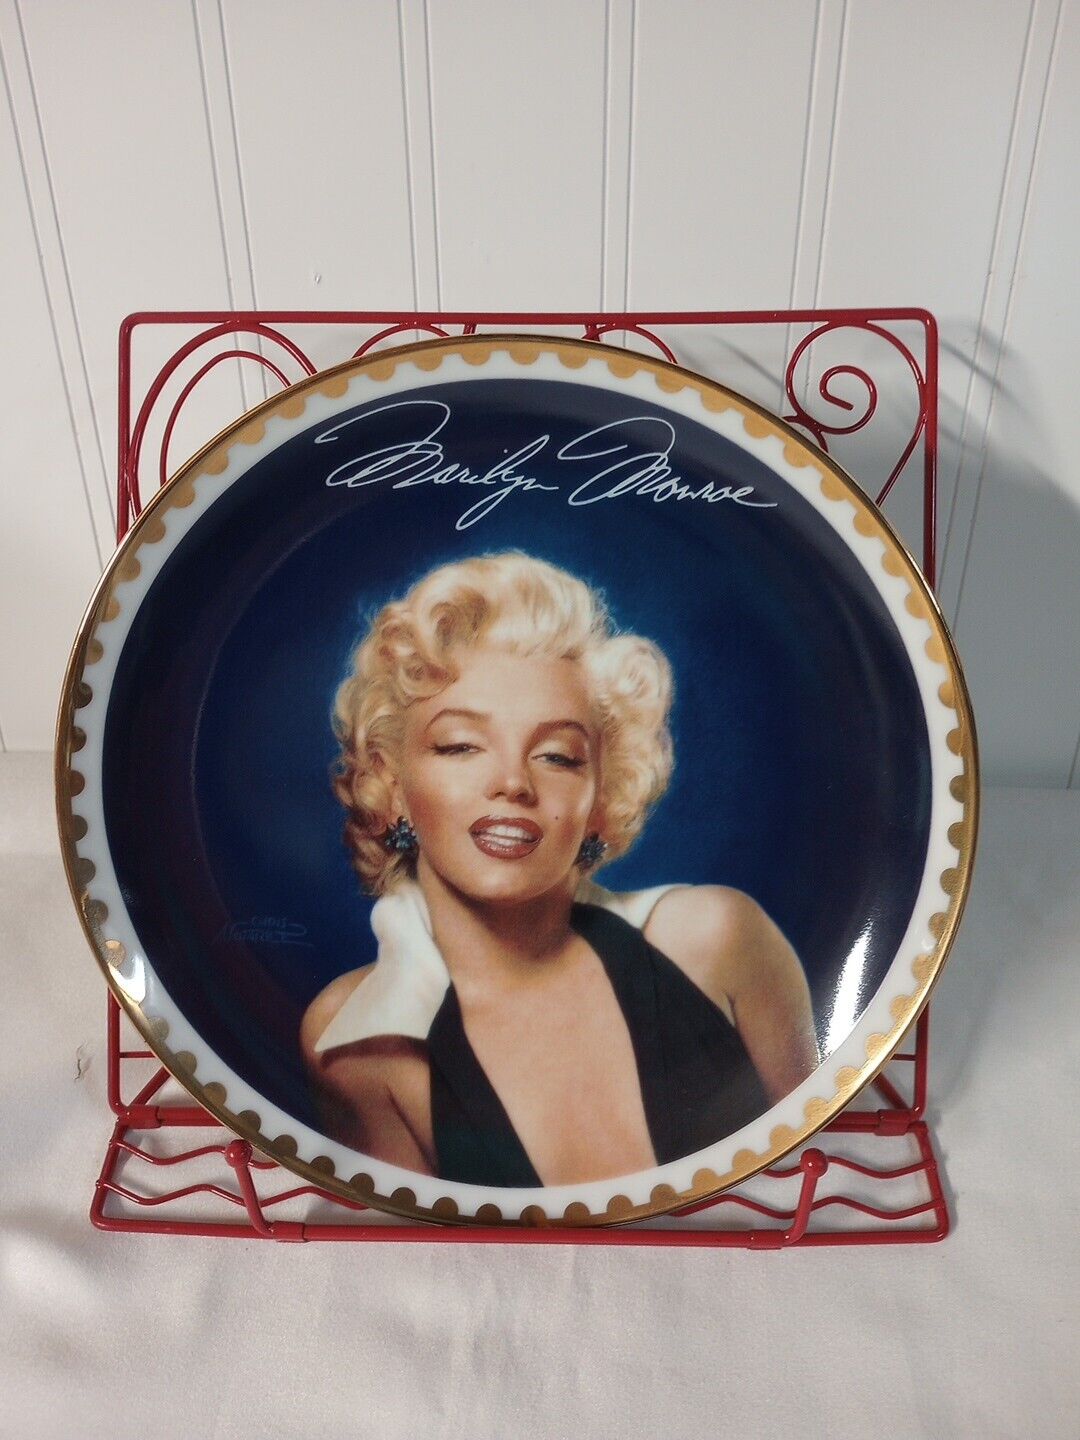 MARILYN MONROE THE GOLD COLLECTION GRACEFUL BEAUTY PLATE # 752A